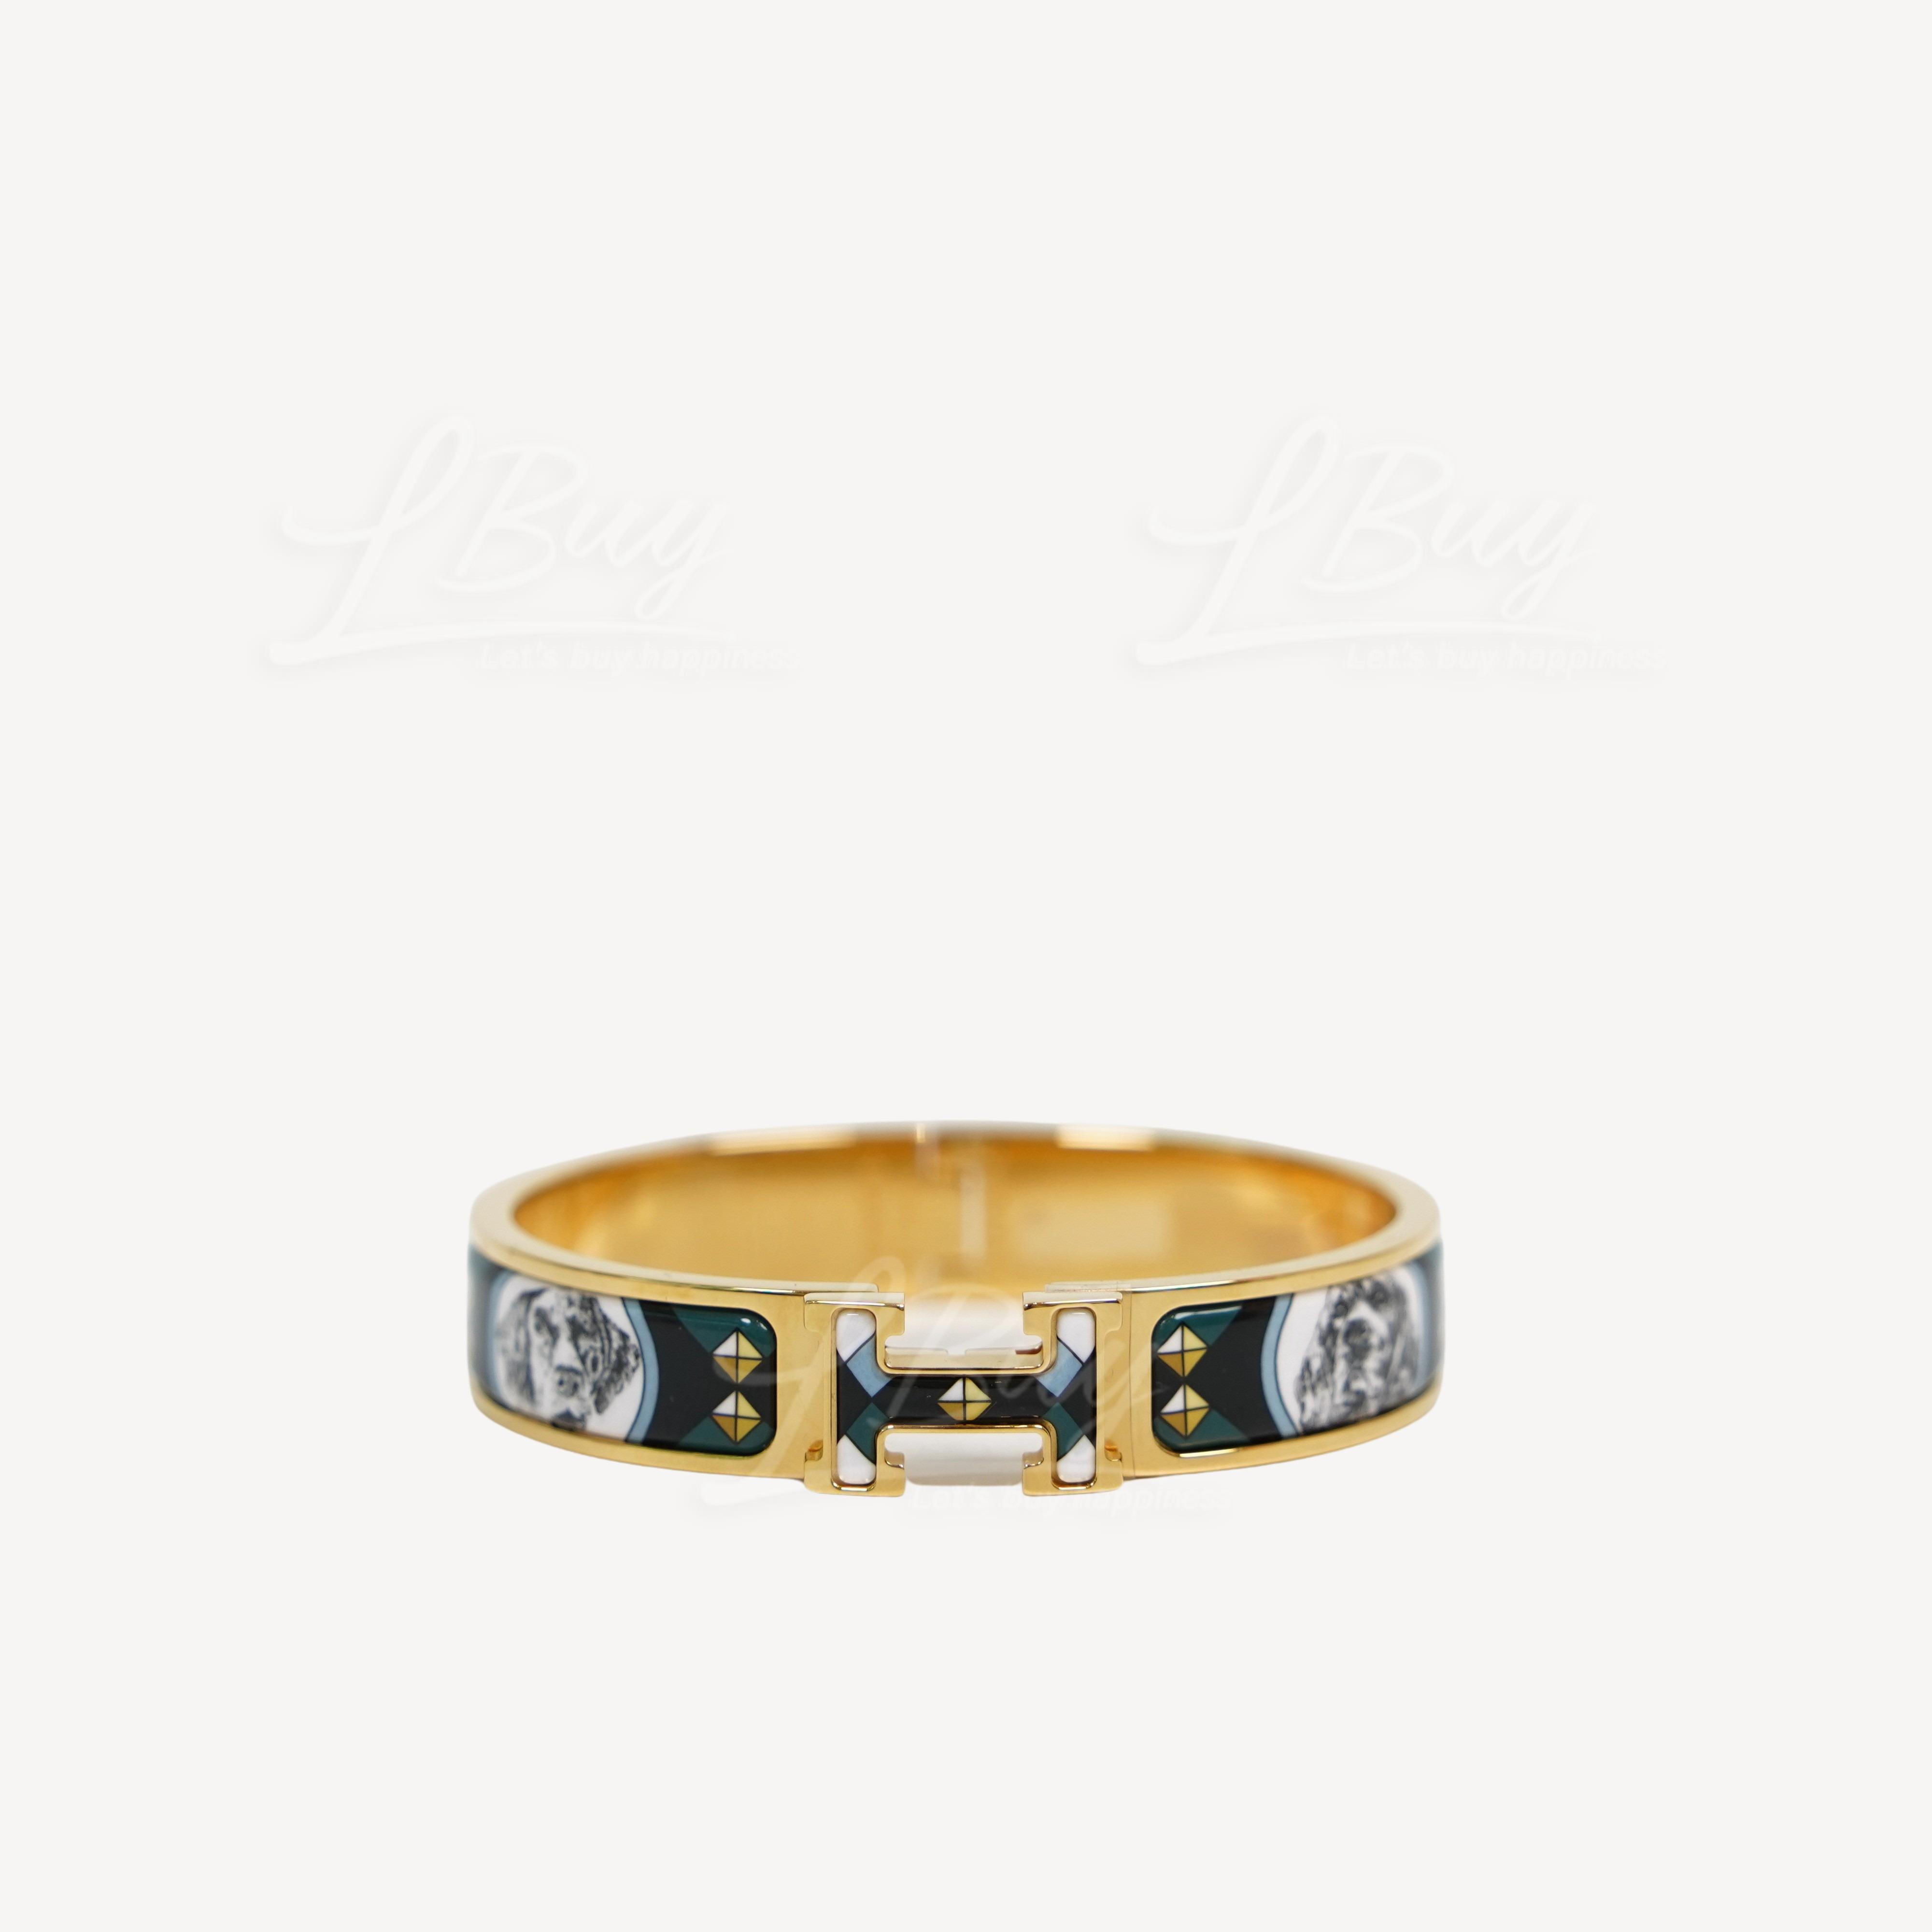 Hermes Clic H Colliers et Chiens Bracelet By The Sea Printed Enamel with Gold Plated Hardware